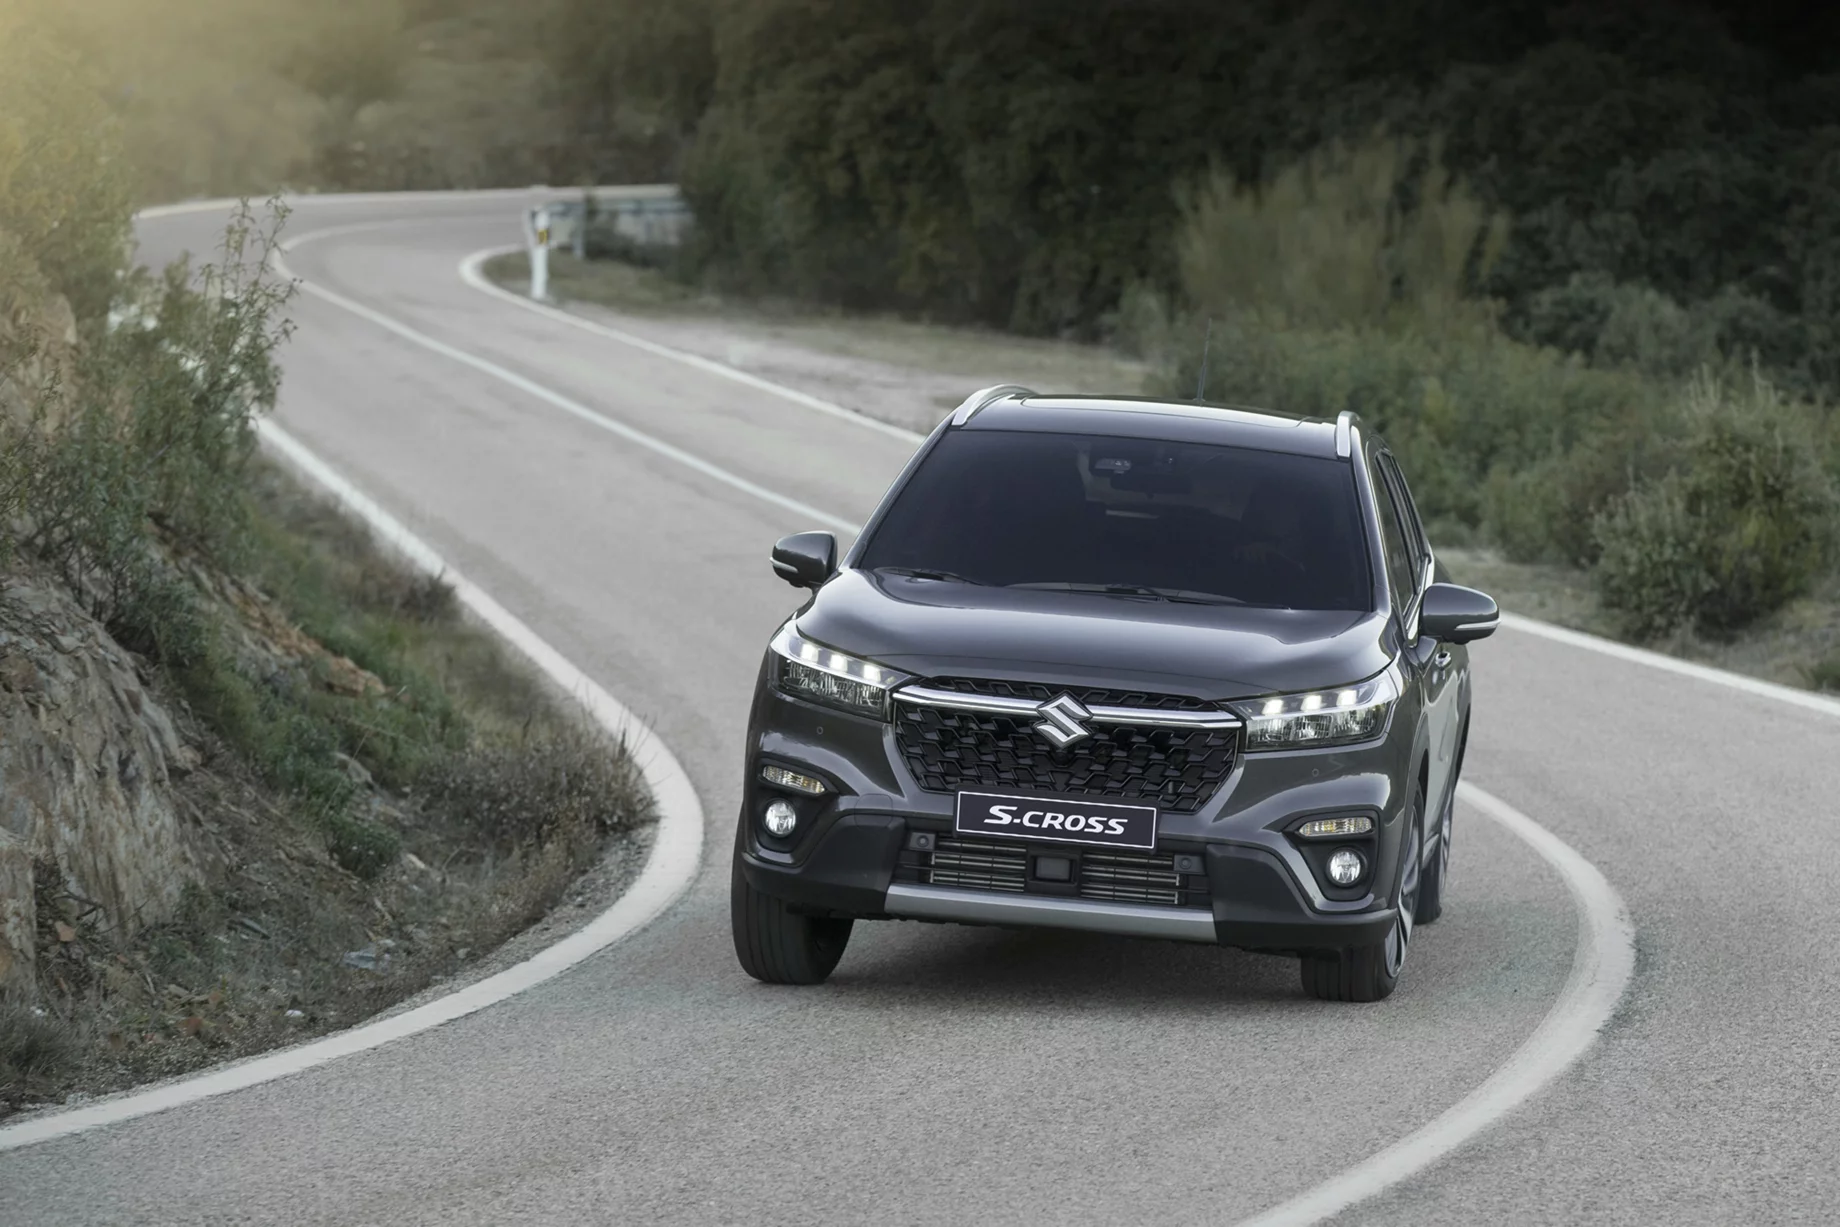 A Dark Grey Suzuki S-Cross driving on a winding country road.